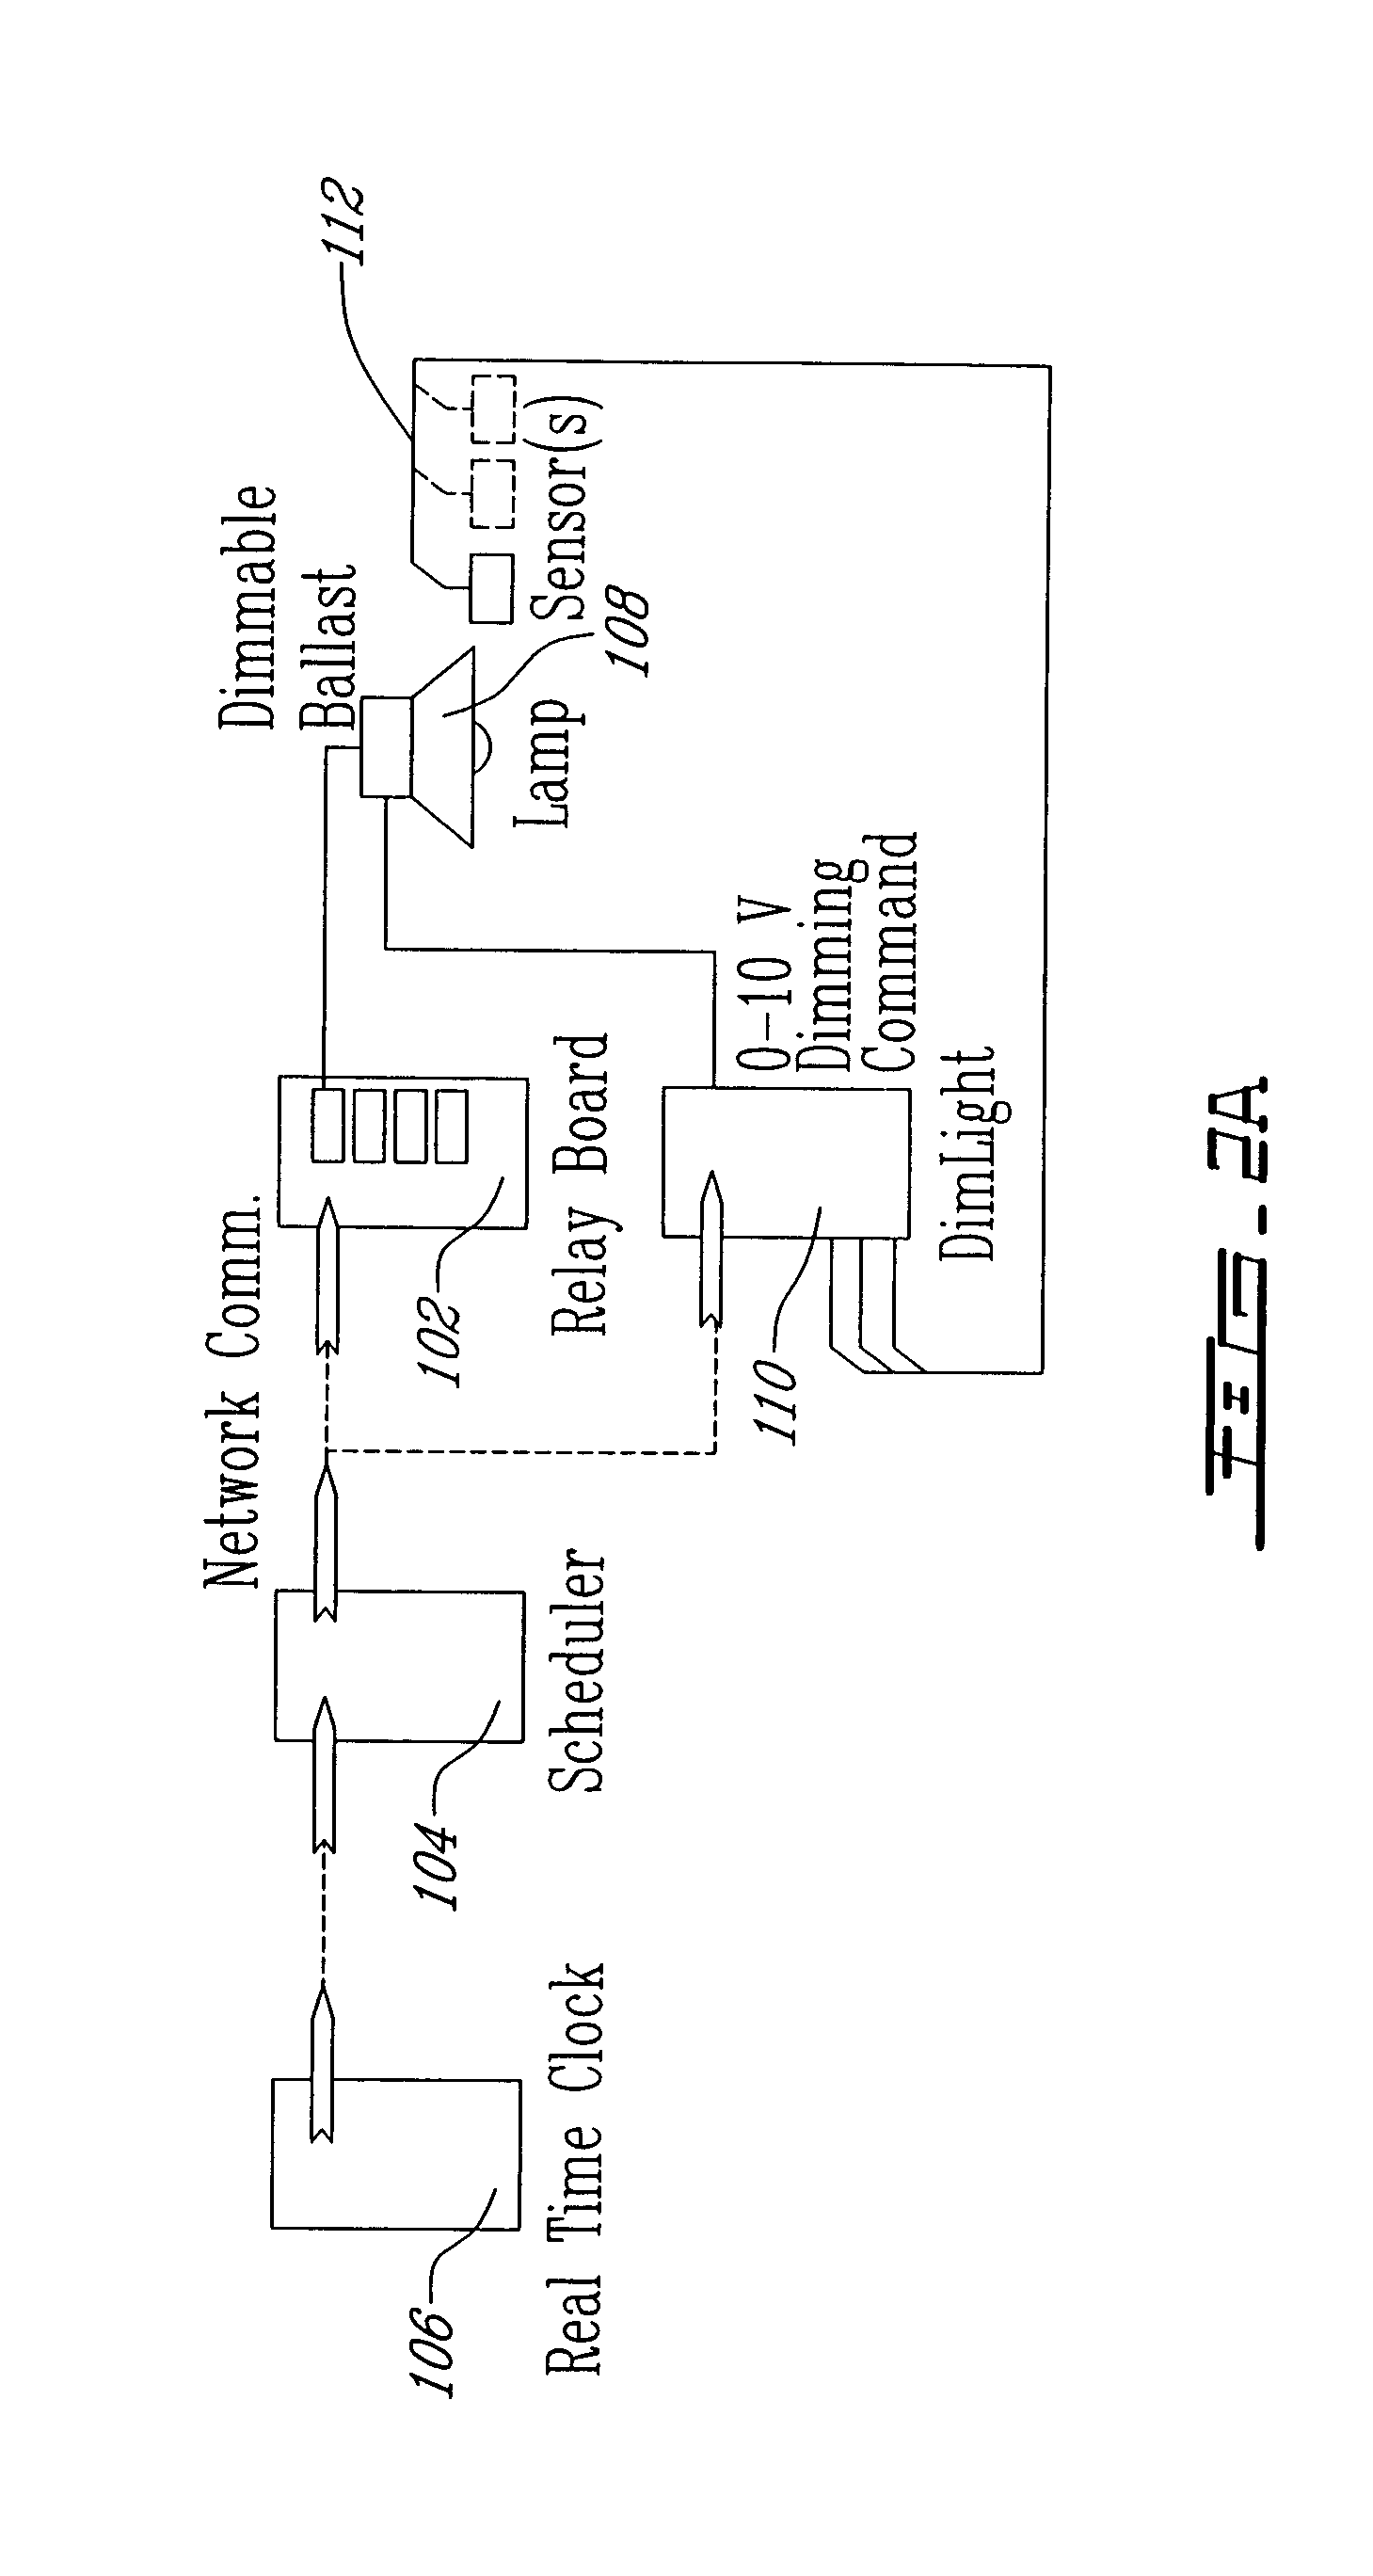 Distributed dimmable lighting control system and method